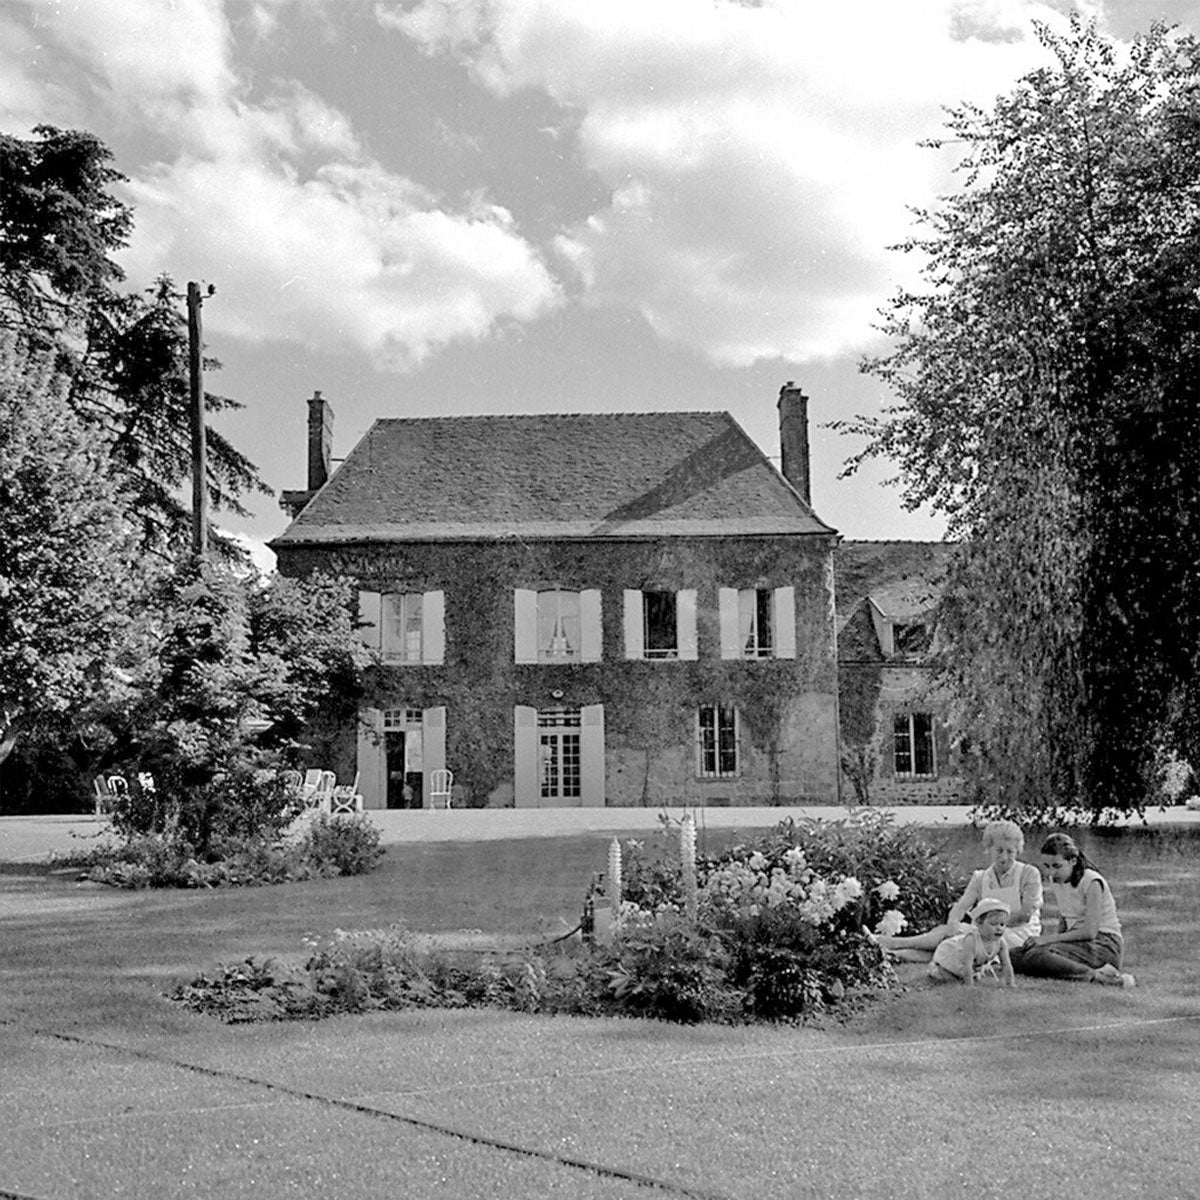 A black and white photograph shows a mother, child and baby sitting near the garden in front of a large country home in the farmlands of France.